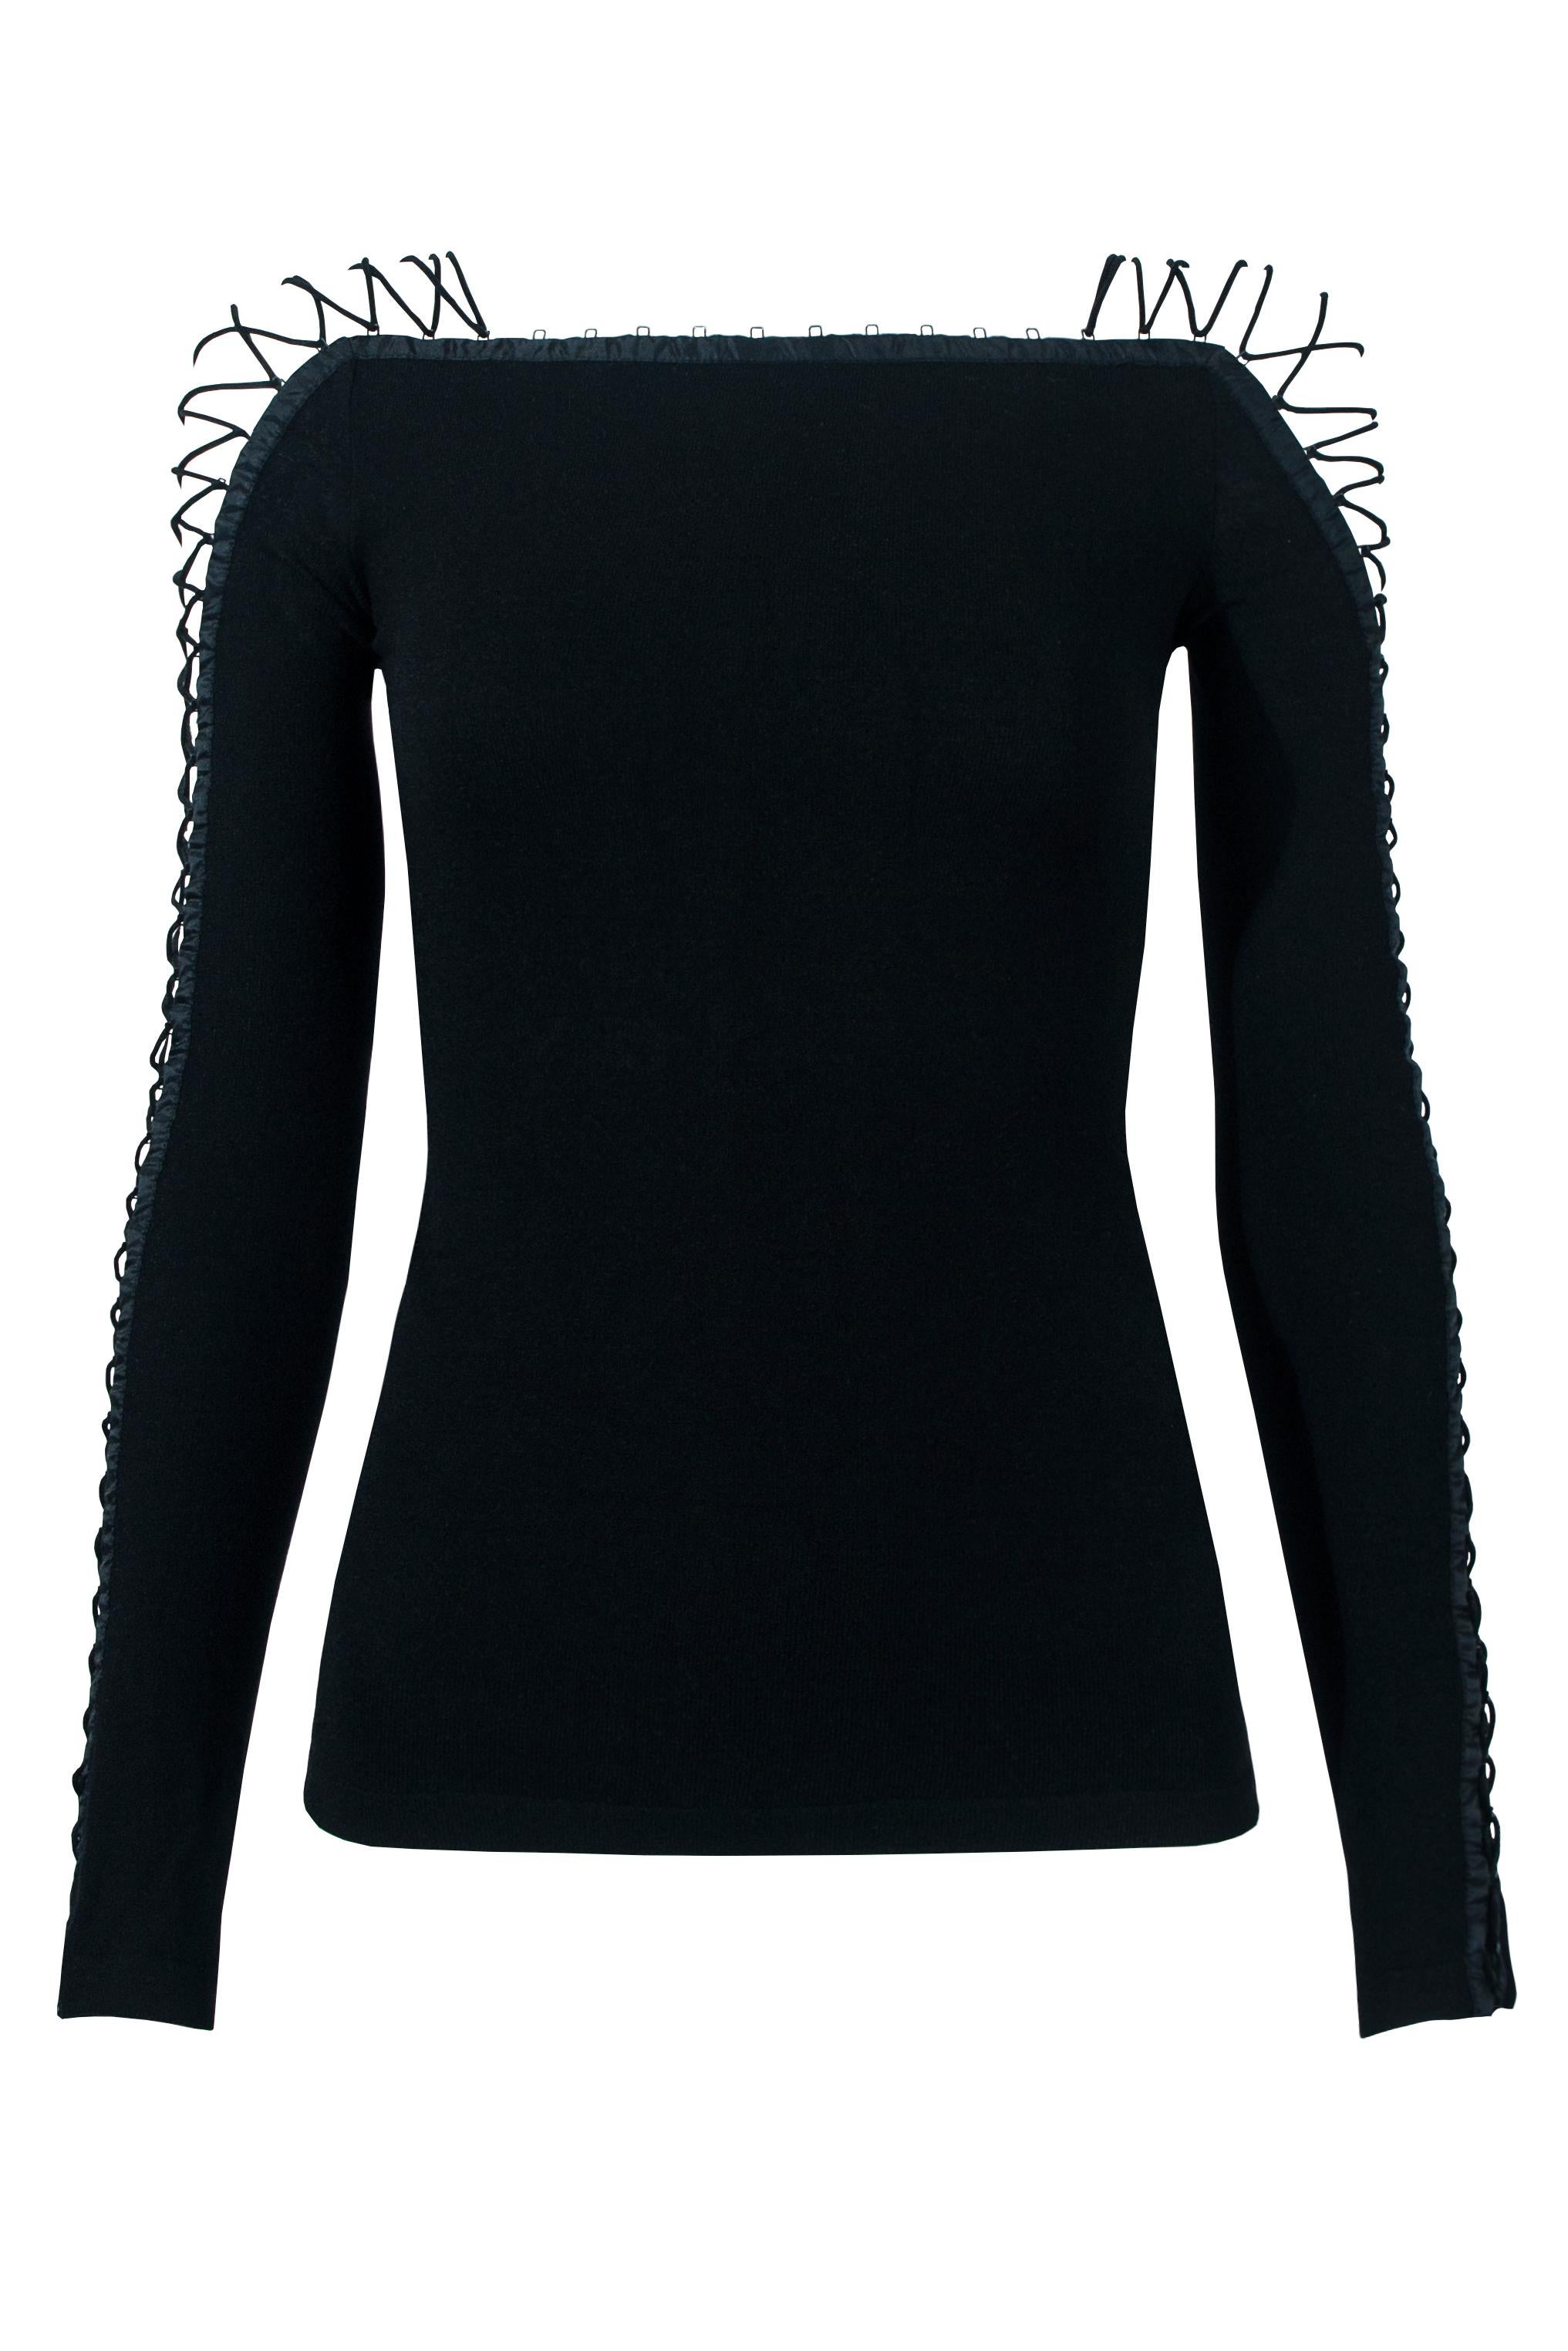 Dolce & Gabbana black lace up top, fw 2003 In Excellent Condition For Sale In Melbourne, AU